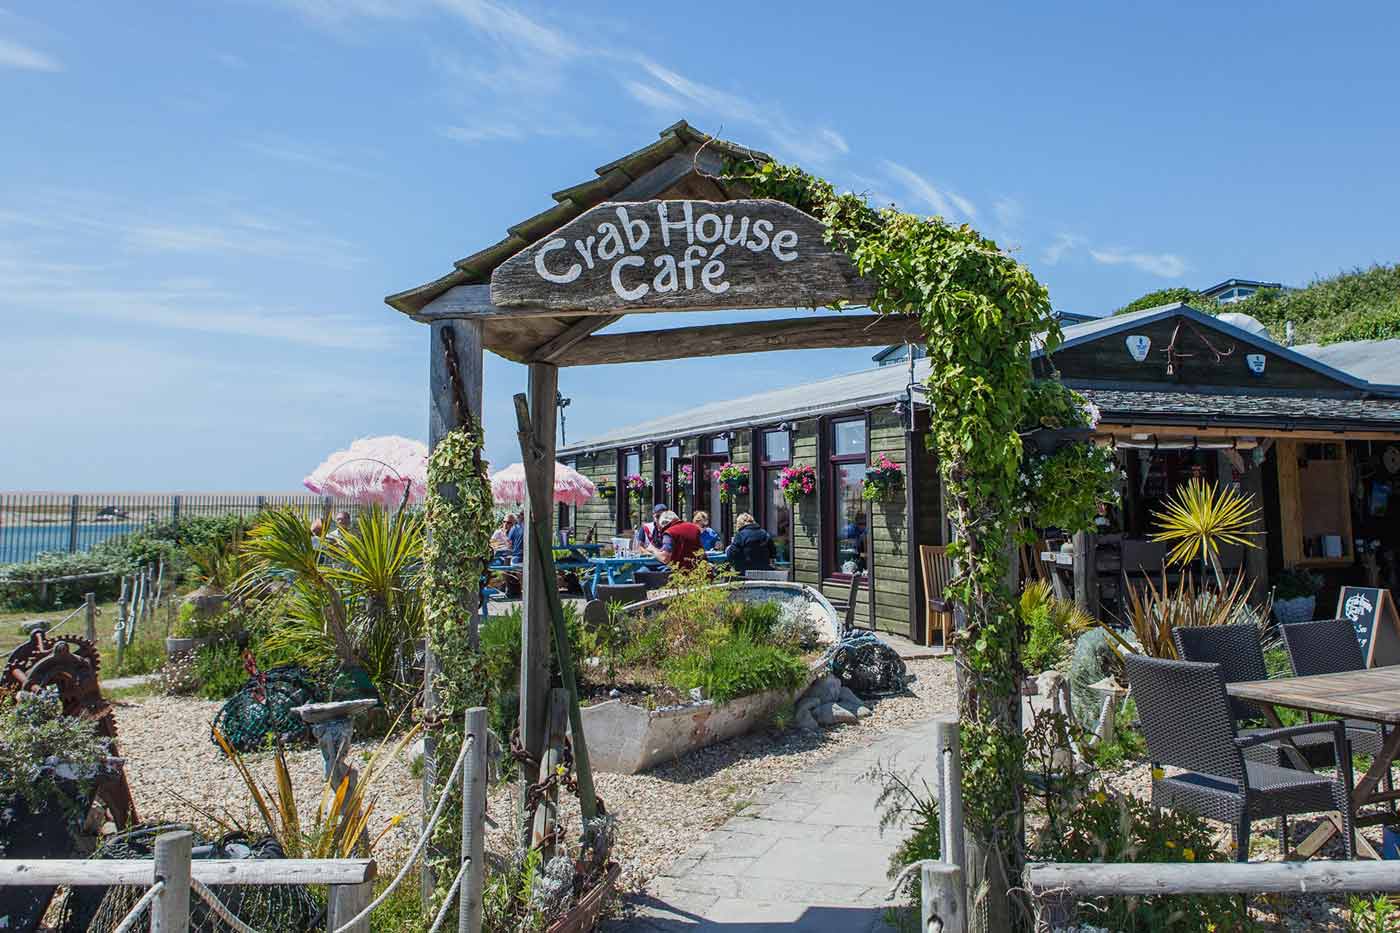 Crab House Cafe